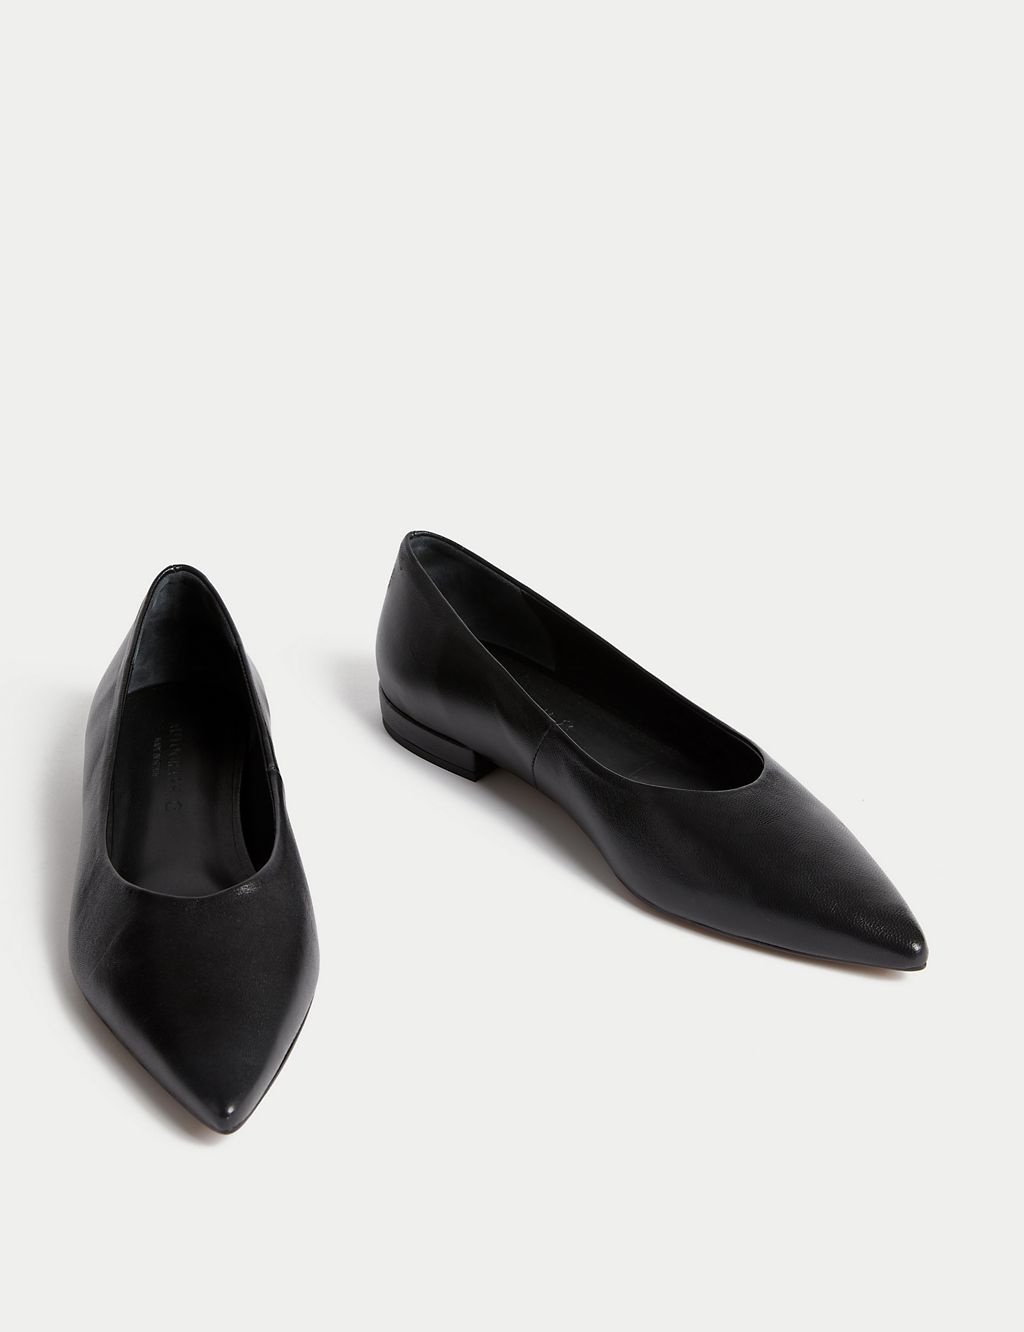 Leather Slip On Flat Pointed Pumps 1 of 3